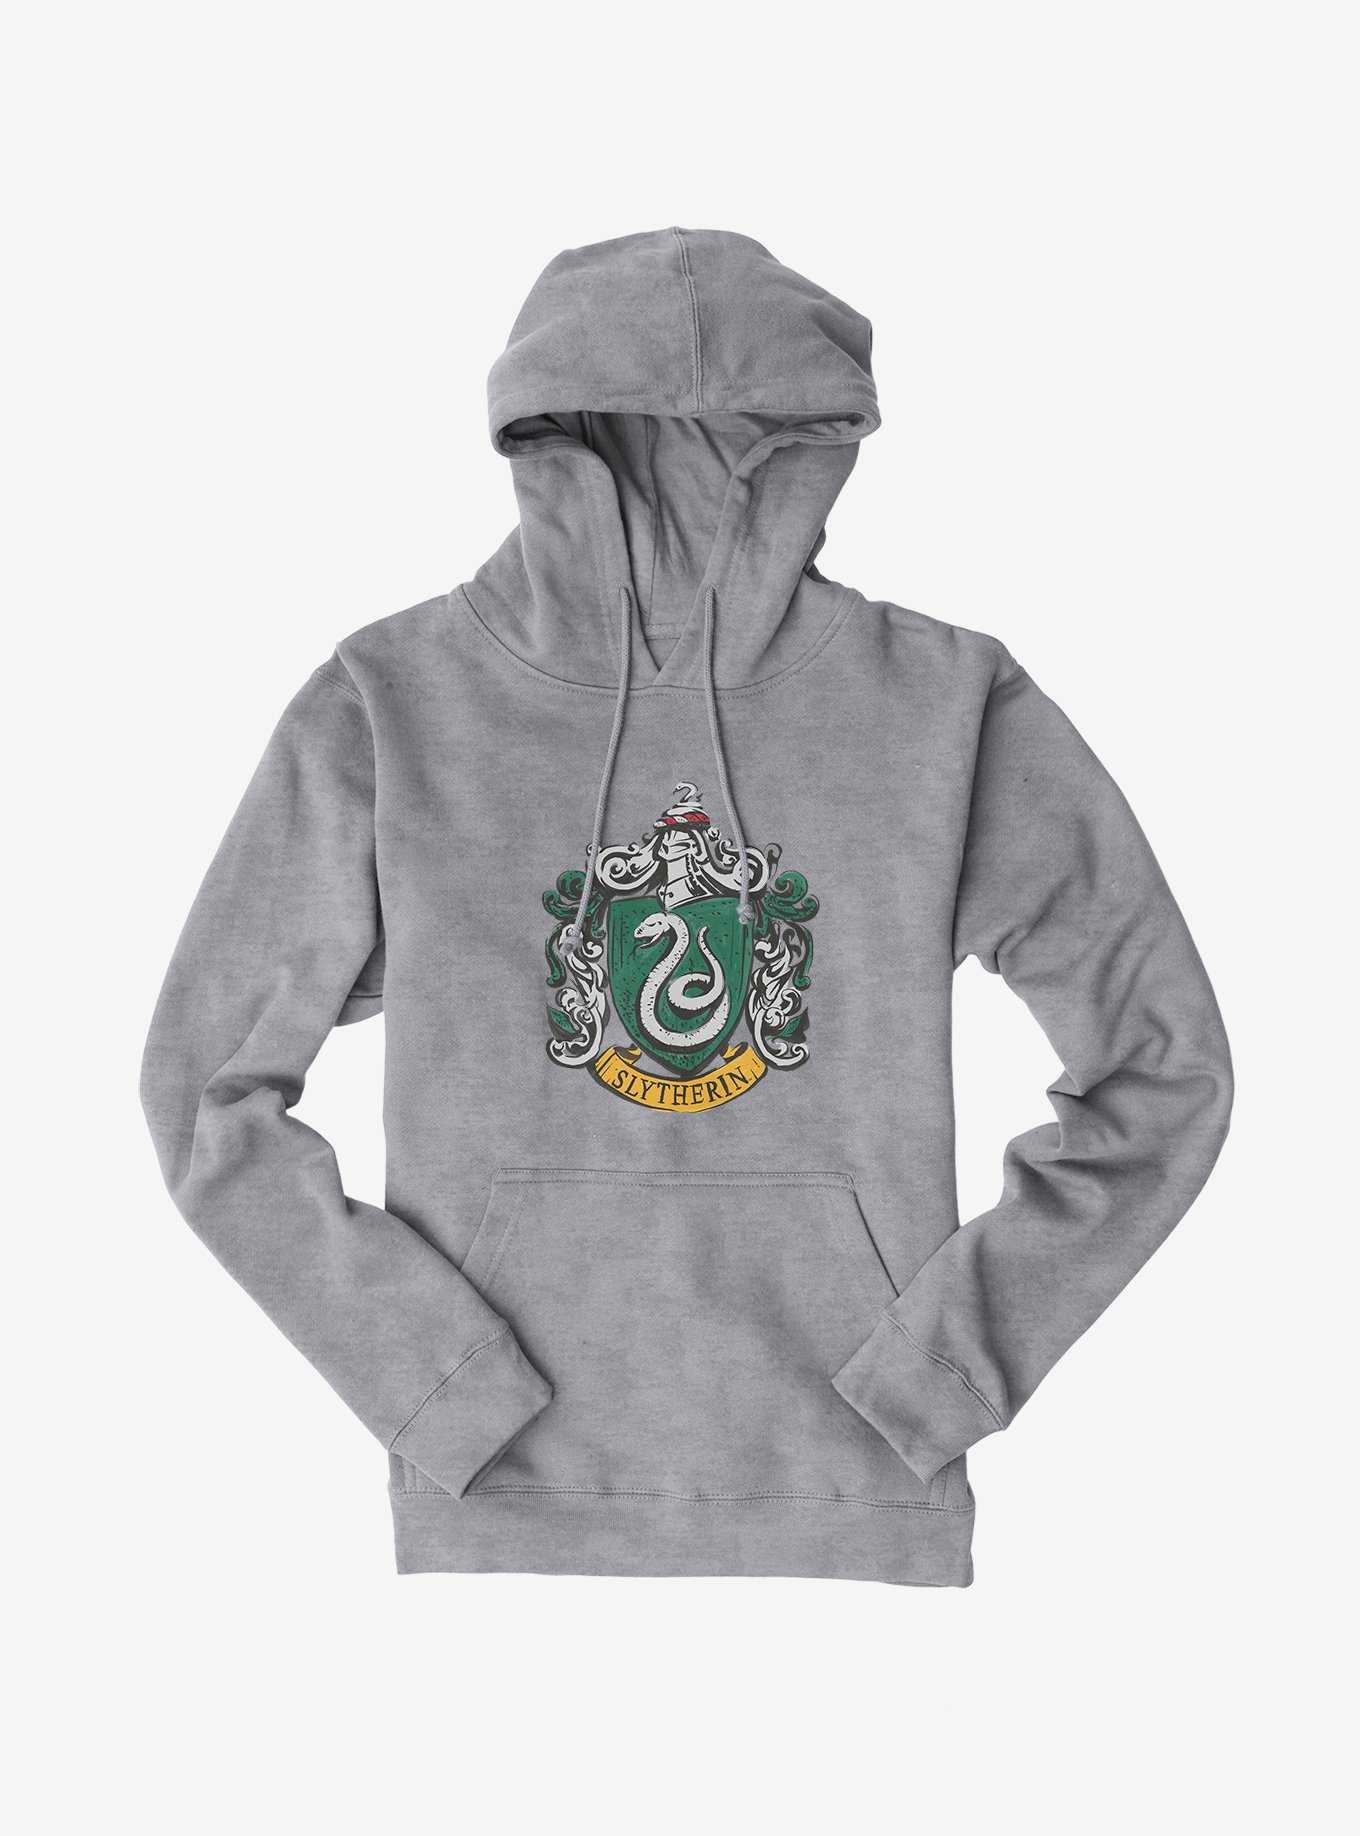 Hot | Sweaters OFFICIAL Hoodies Potter Topic Harry &